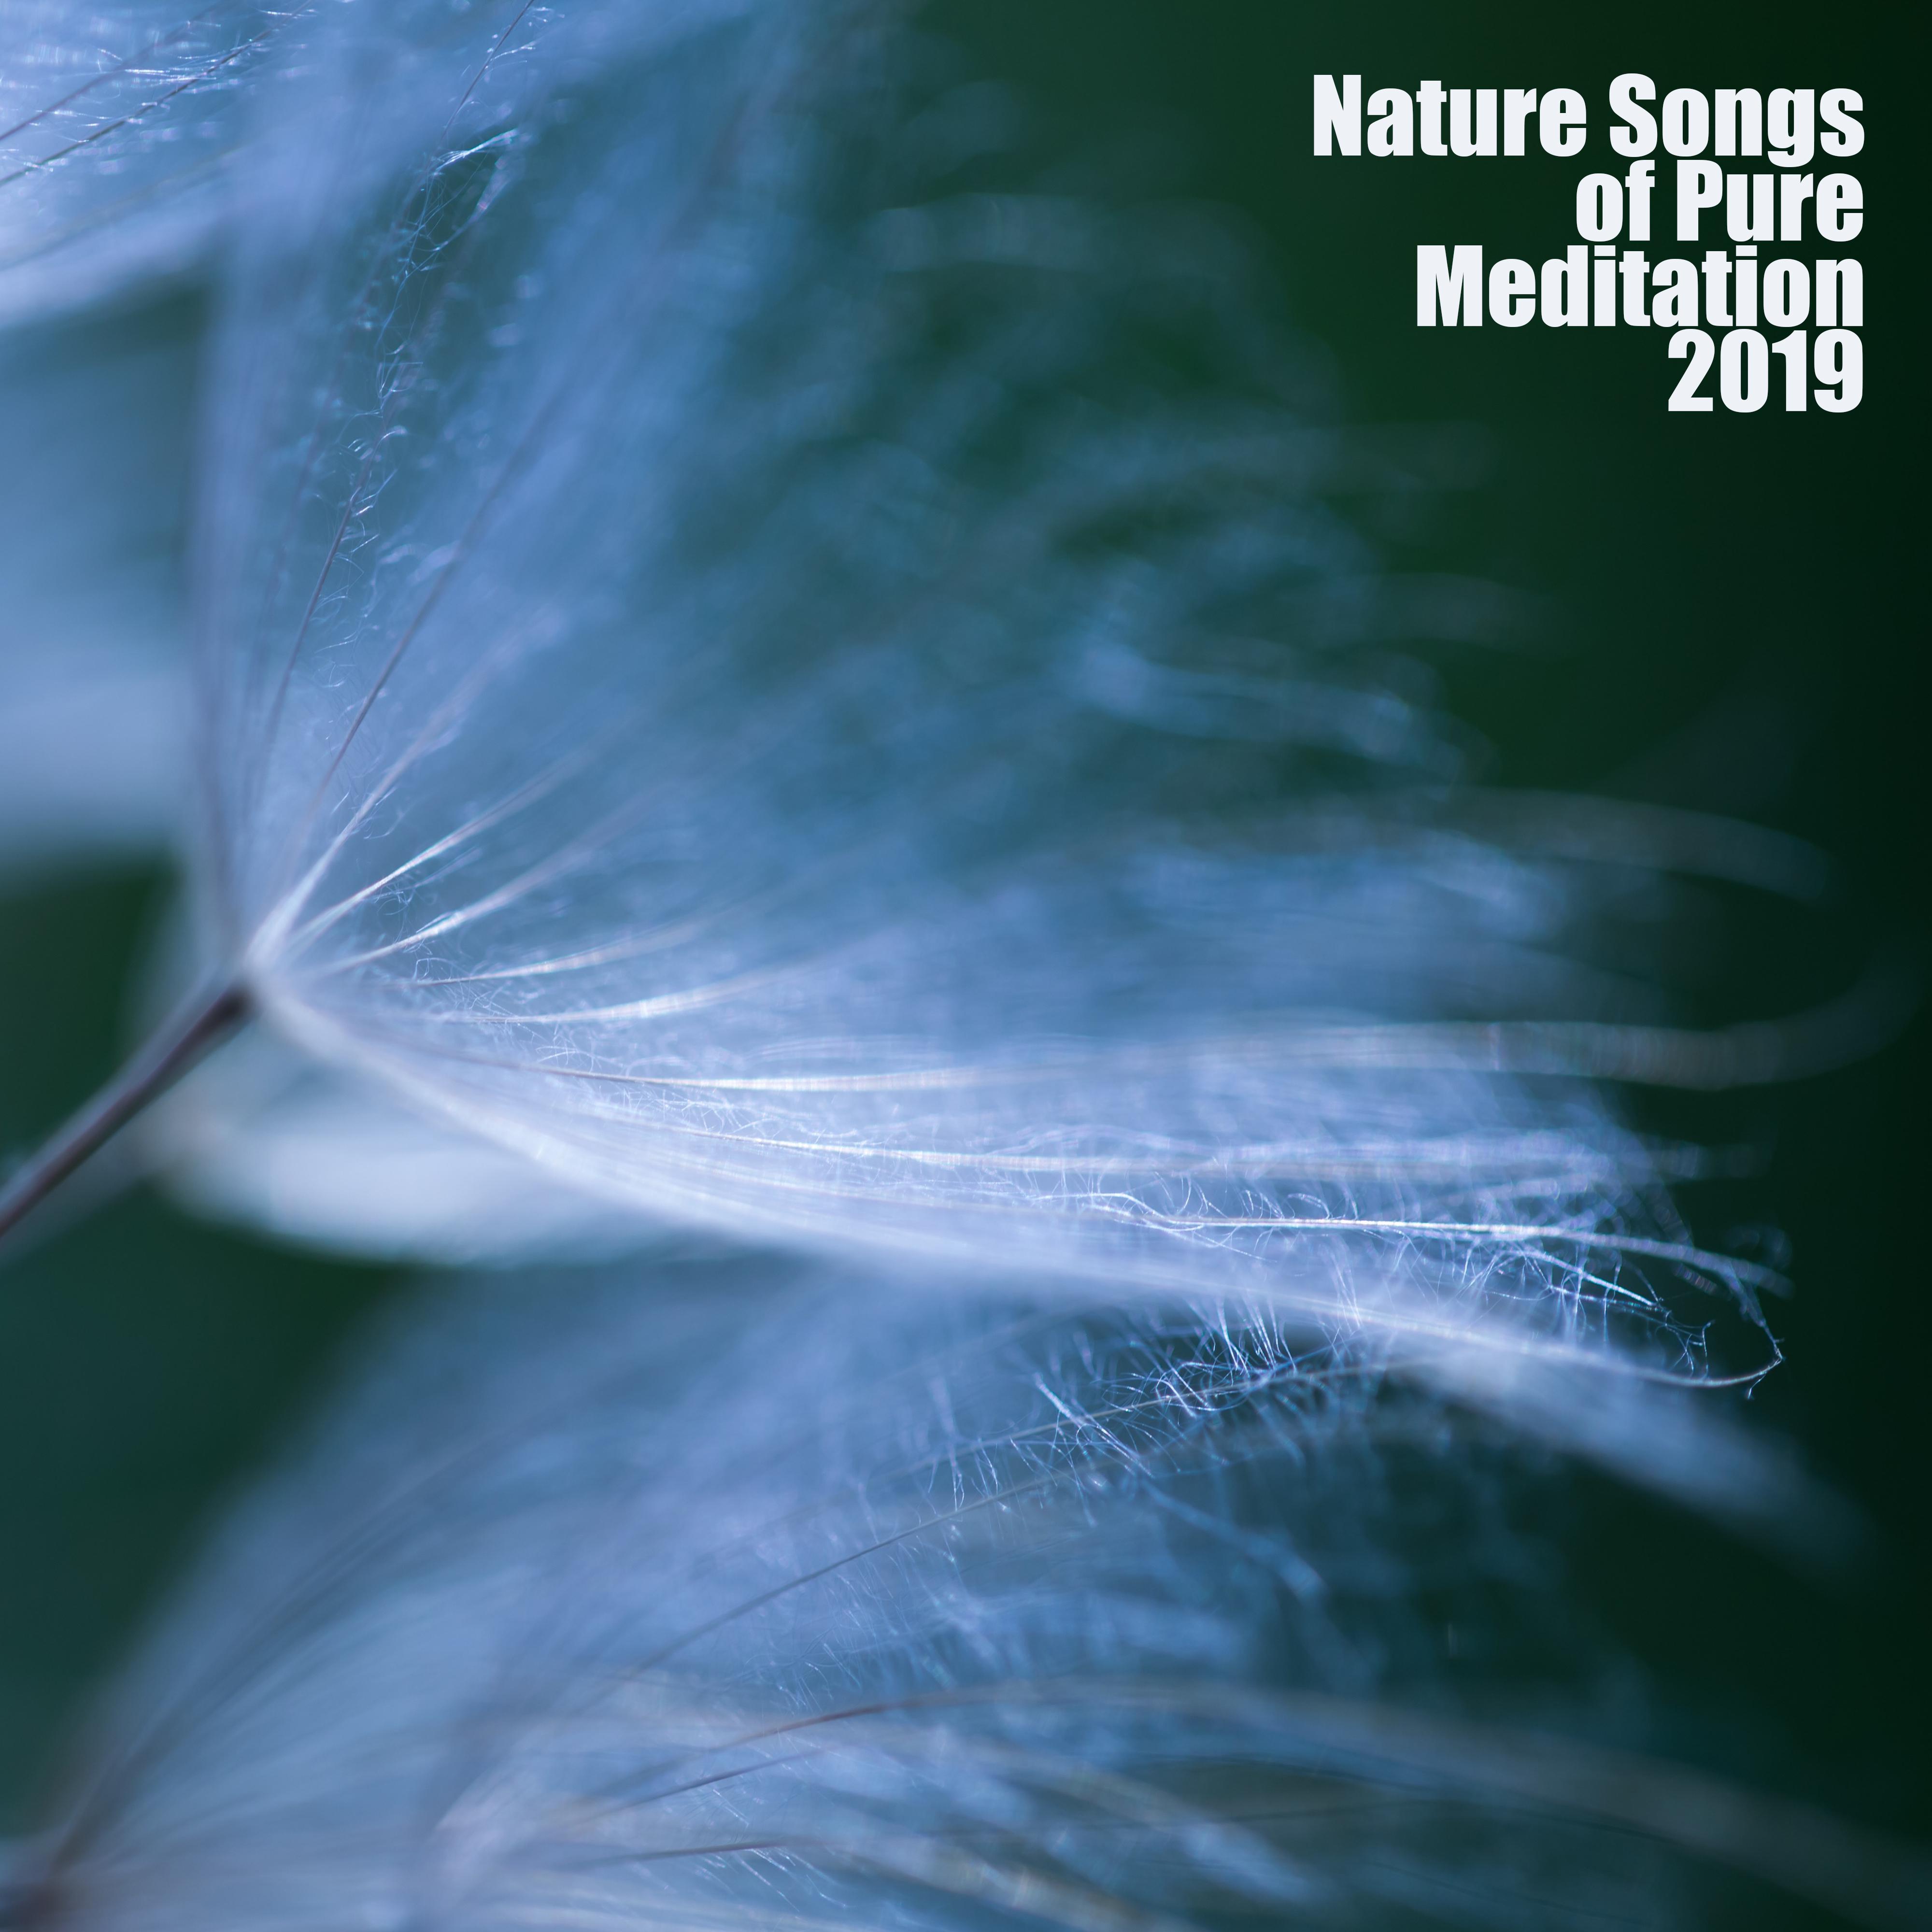 Nature Songs of Pure Meditation 2019: 15 New Age Music for Yoga & Relaxation, Sounds of Birds, Water, Wind